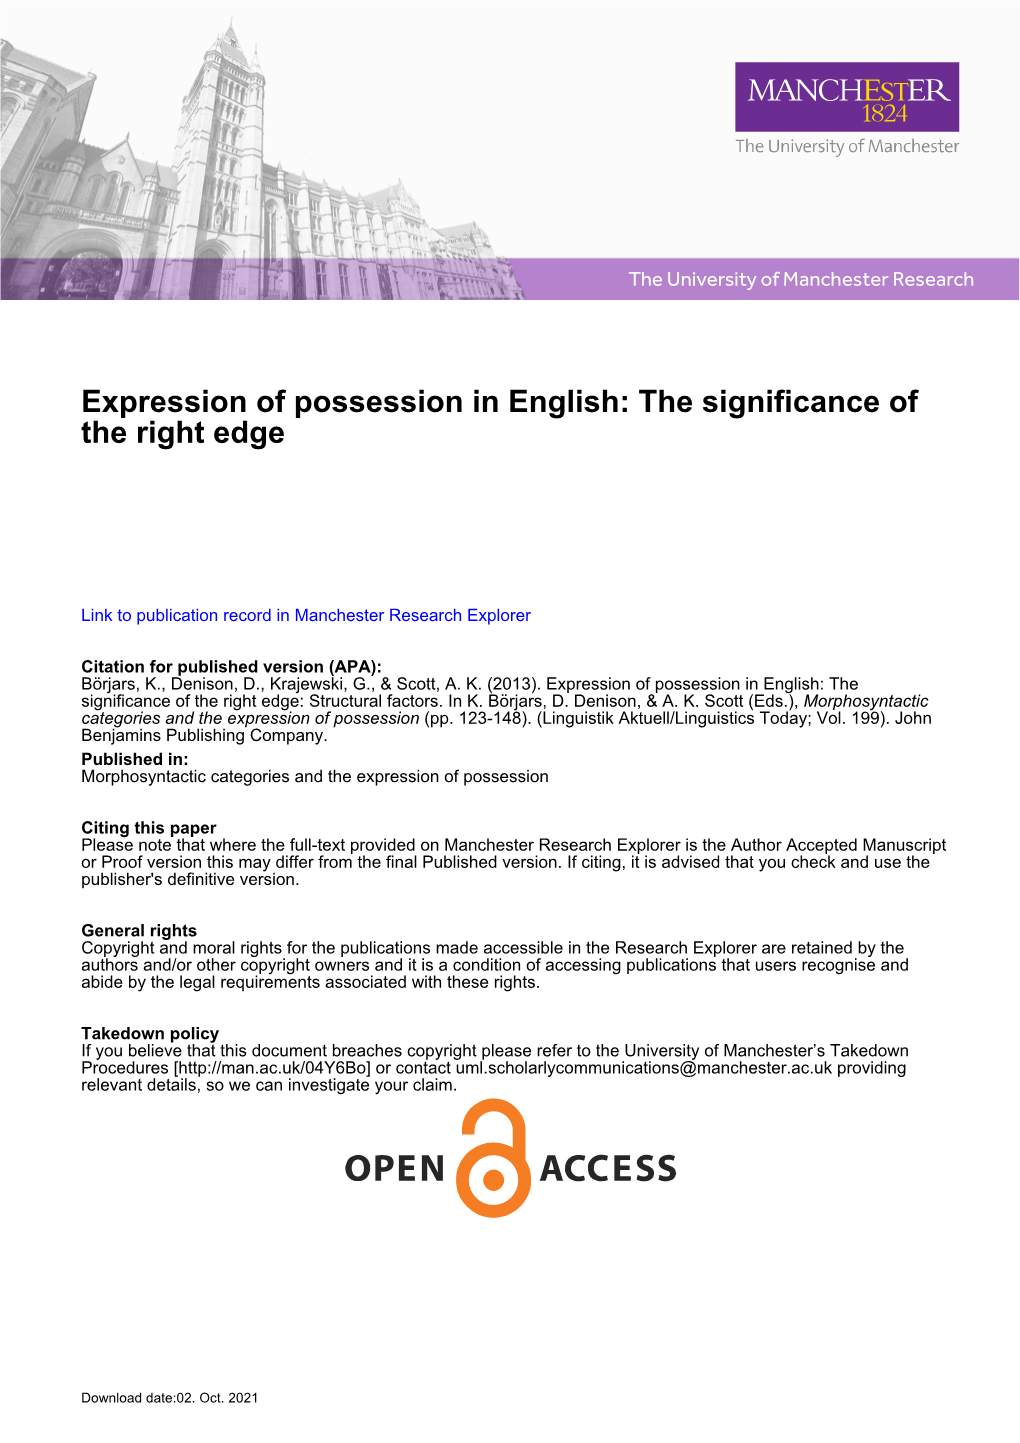 Expression of Possession in English: the Significance of the Right Edge